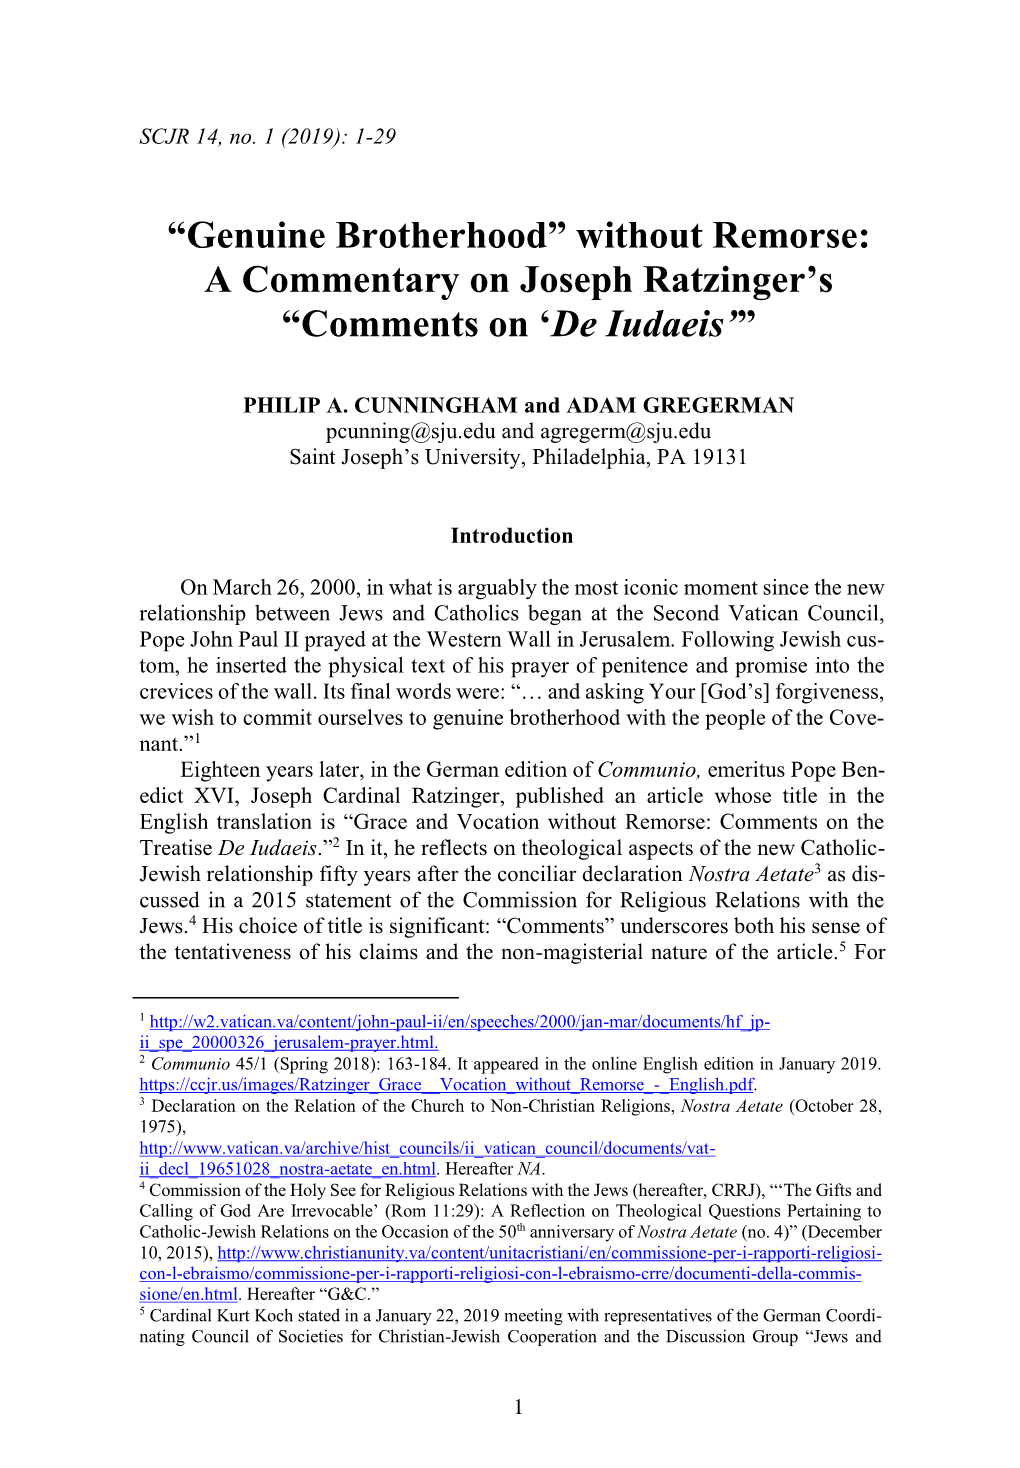 A Commentary on Joseph Ratzinger's